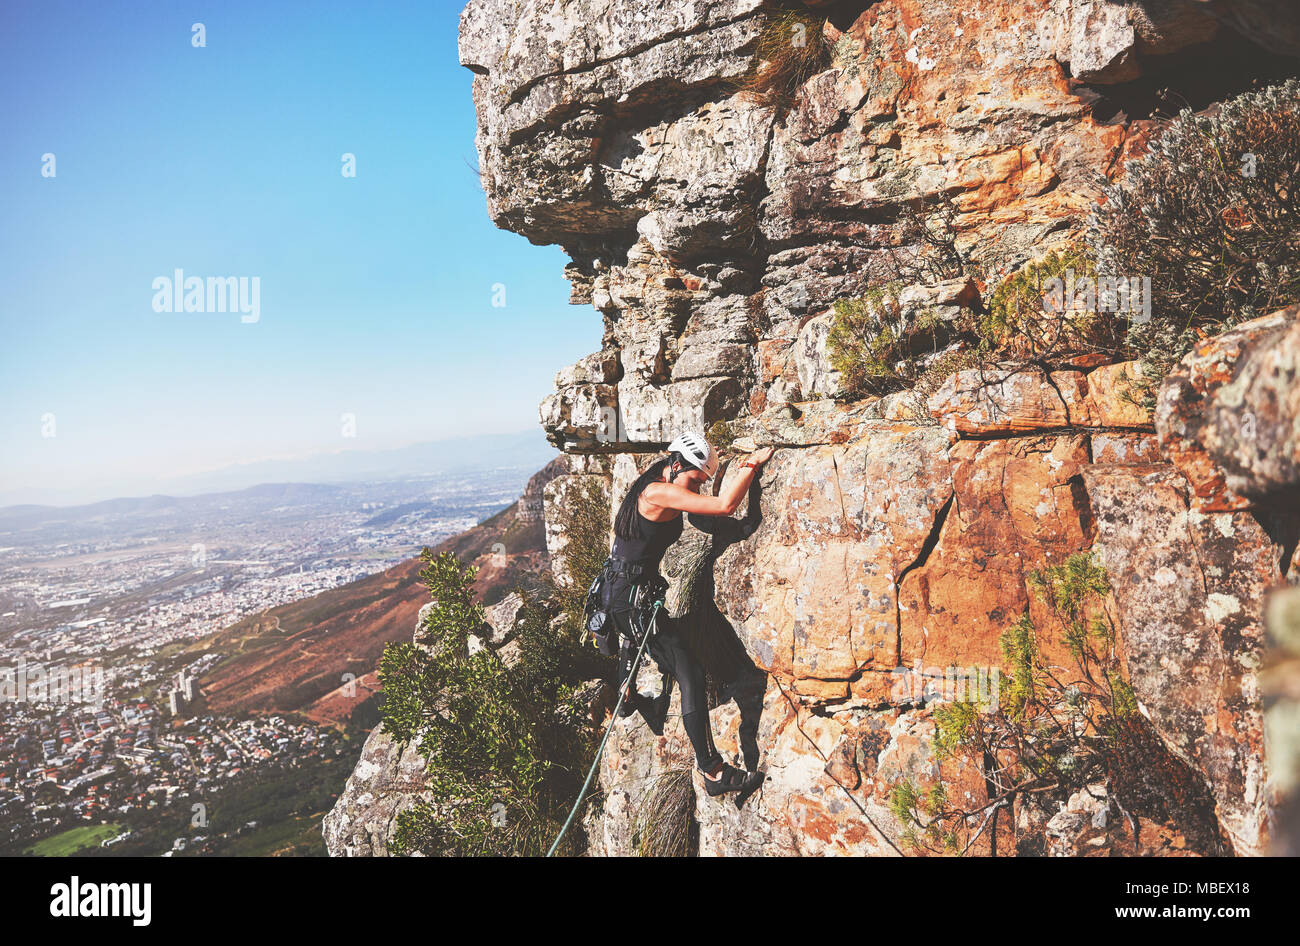 Female rock climber hanging from rock Stock Photo